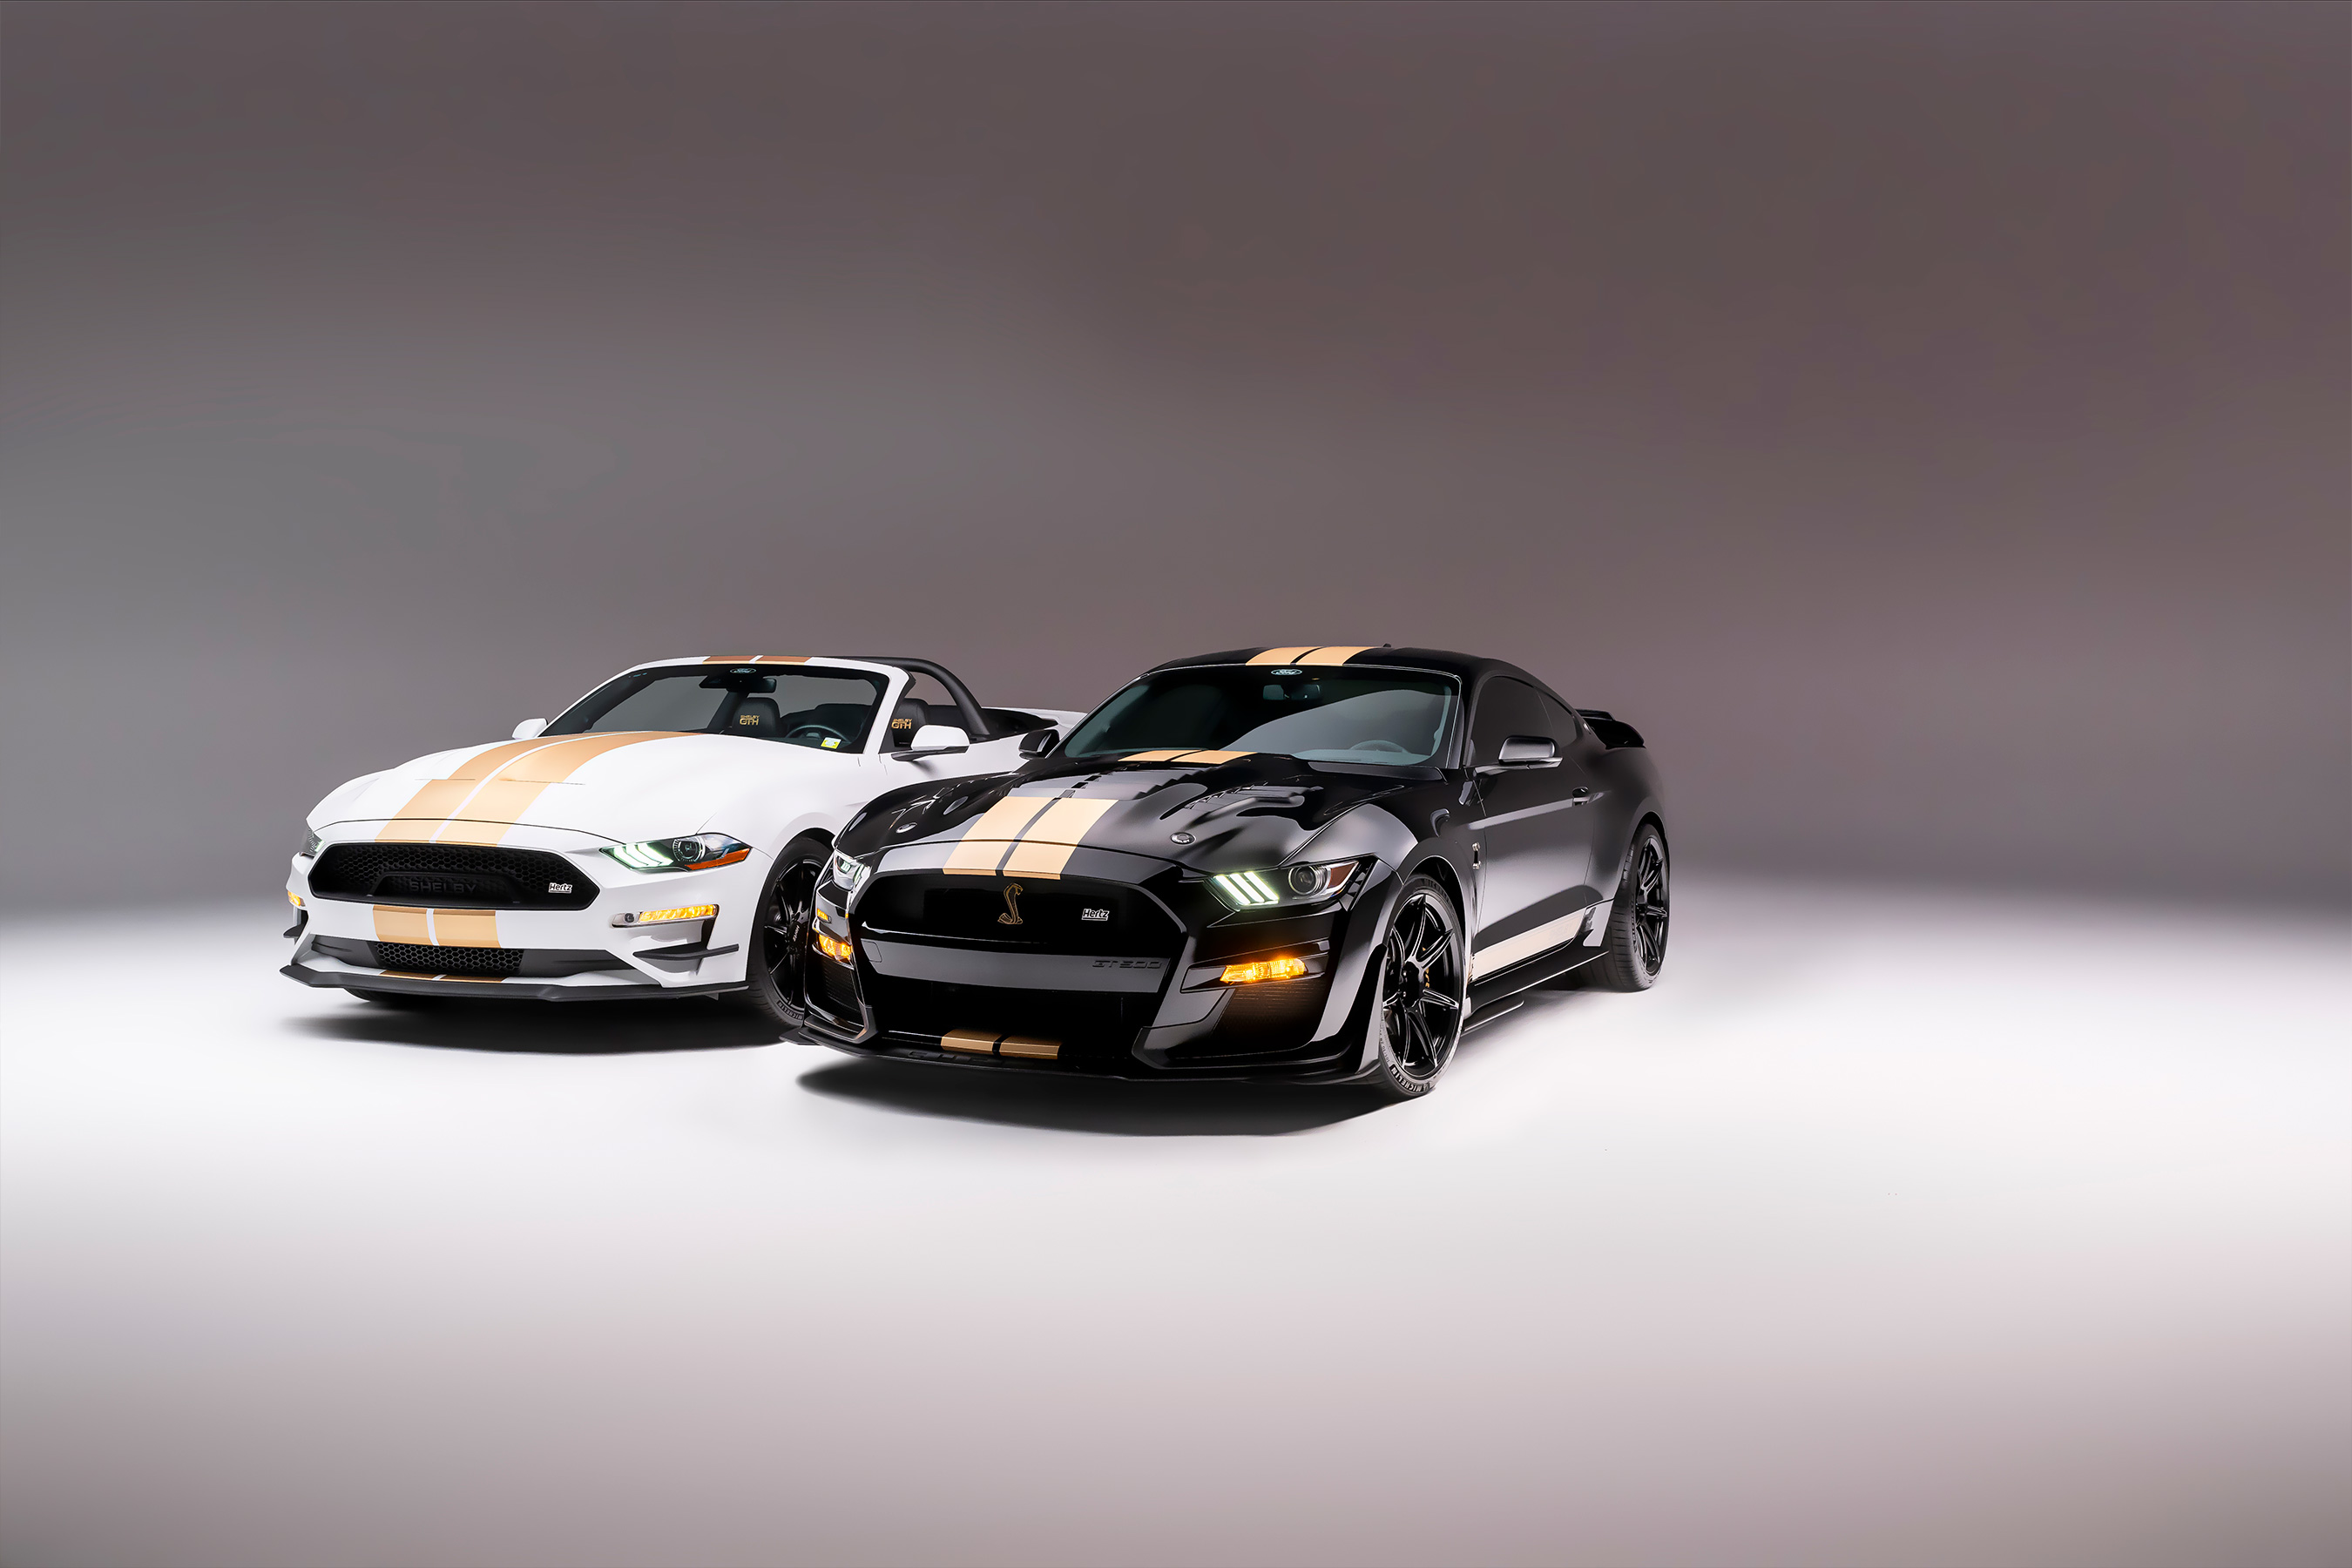 A tribute to the original Hertz Shelby “Rent-A-Racer” program, this collection builds on Hertz's legacy to give consumers the unique opportunity to drive elite, high-performance vehicles.